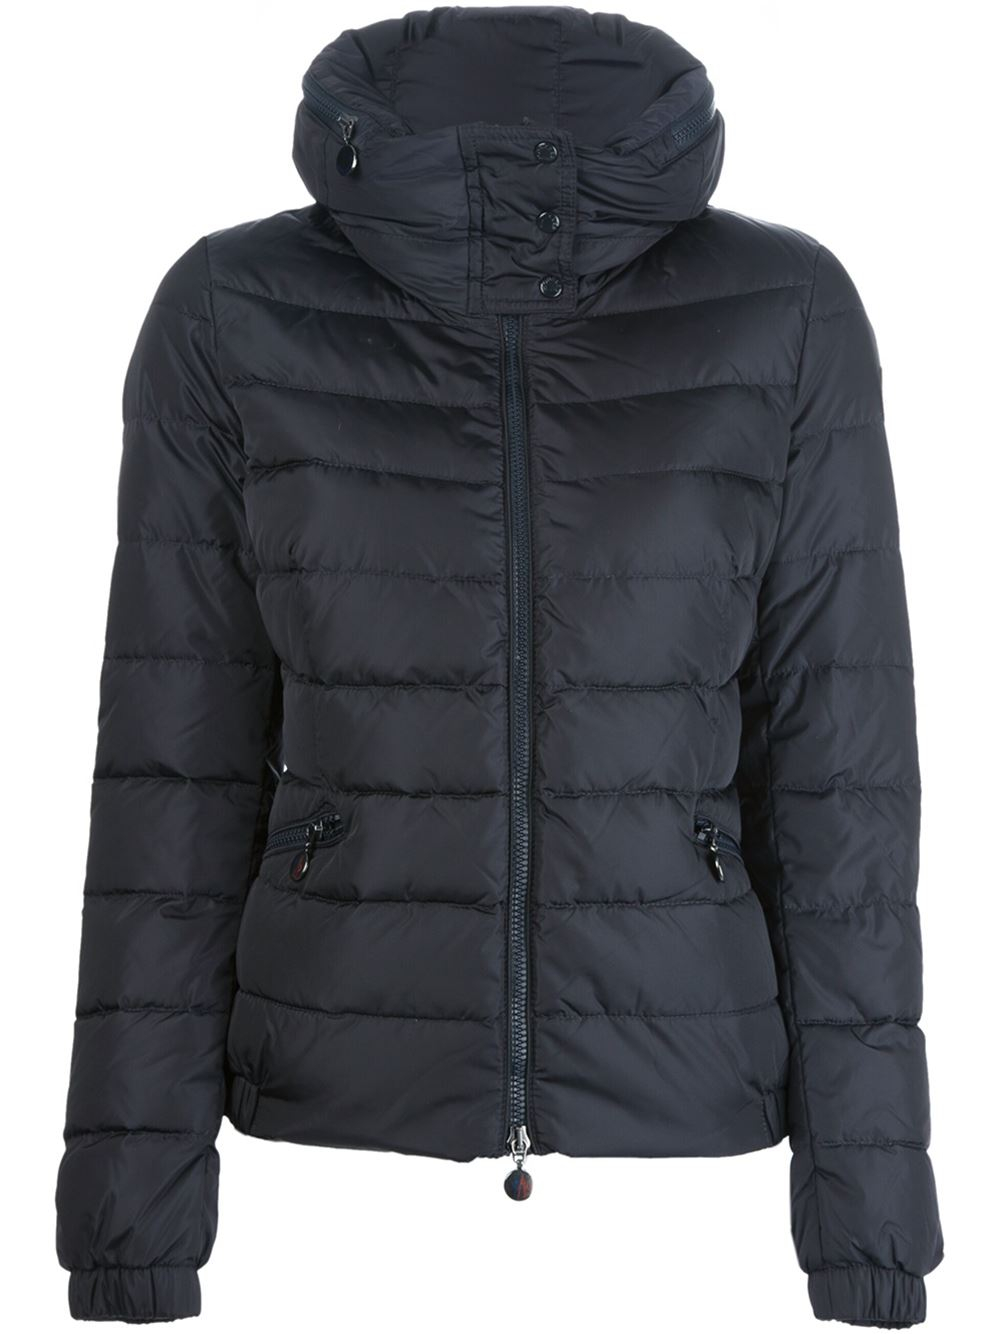 Moncler Sanglier Padded Jacket in Blue - Lyst